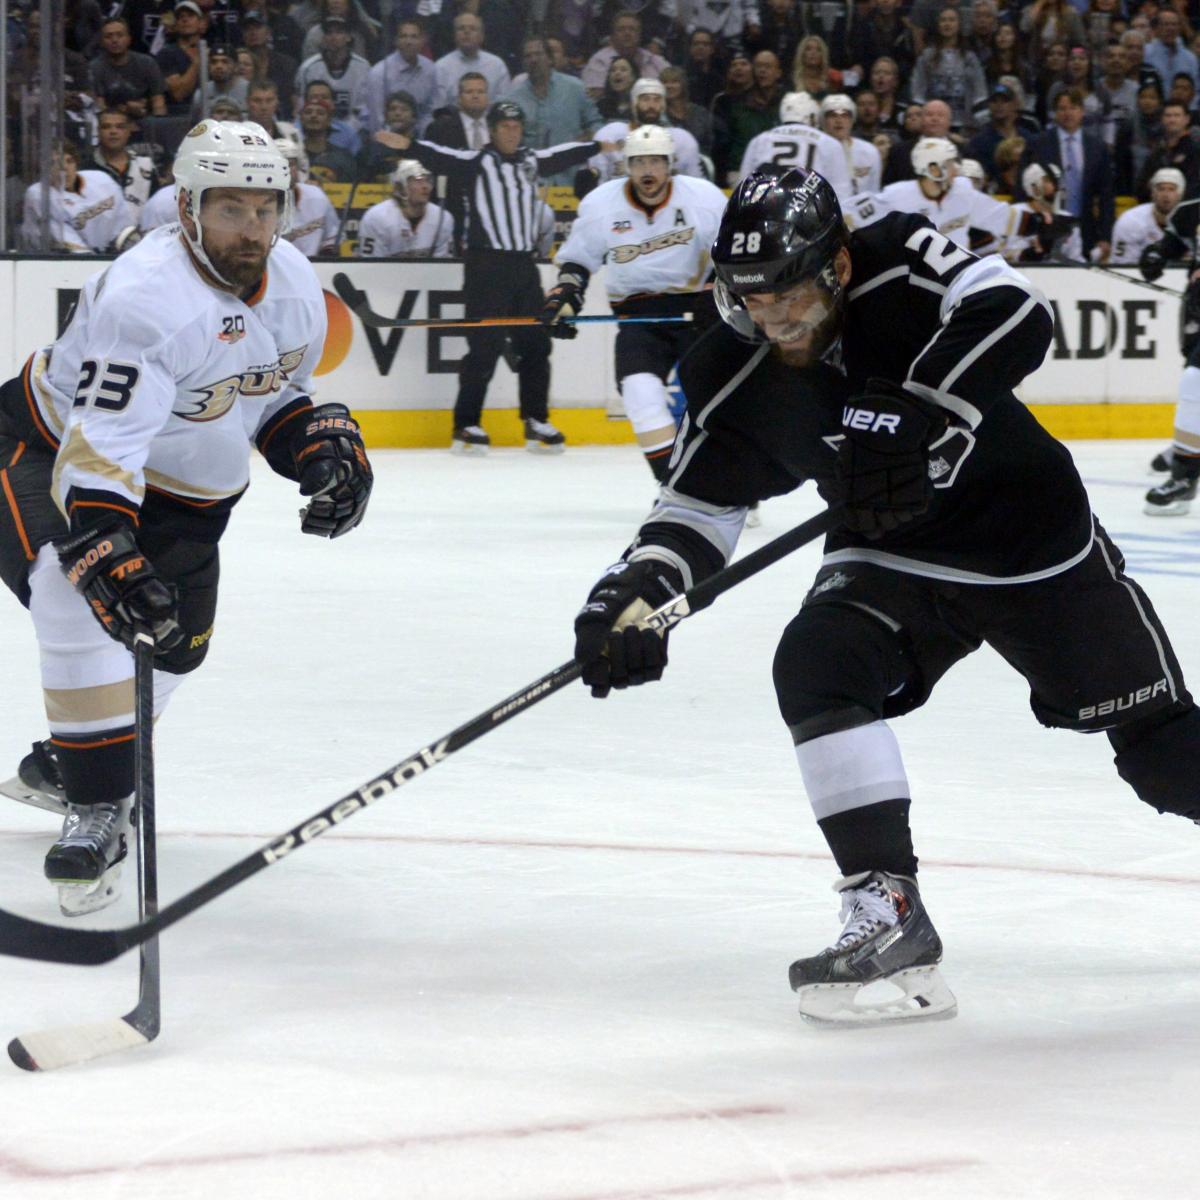 After Anaheim Ducks get up-and-down win over Los Angeles Kings,  expectations for Game 6 are anyone's guess